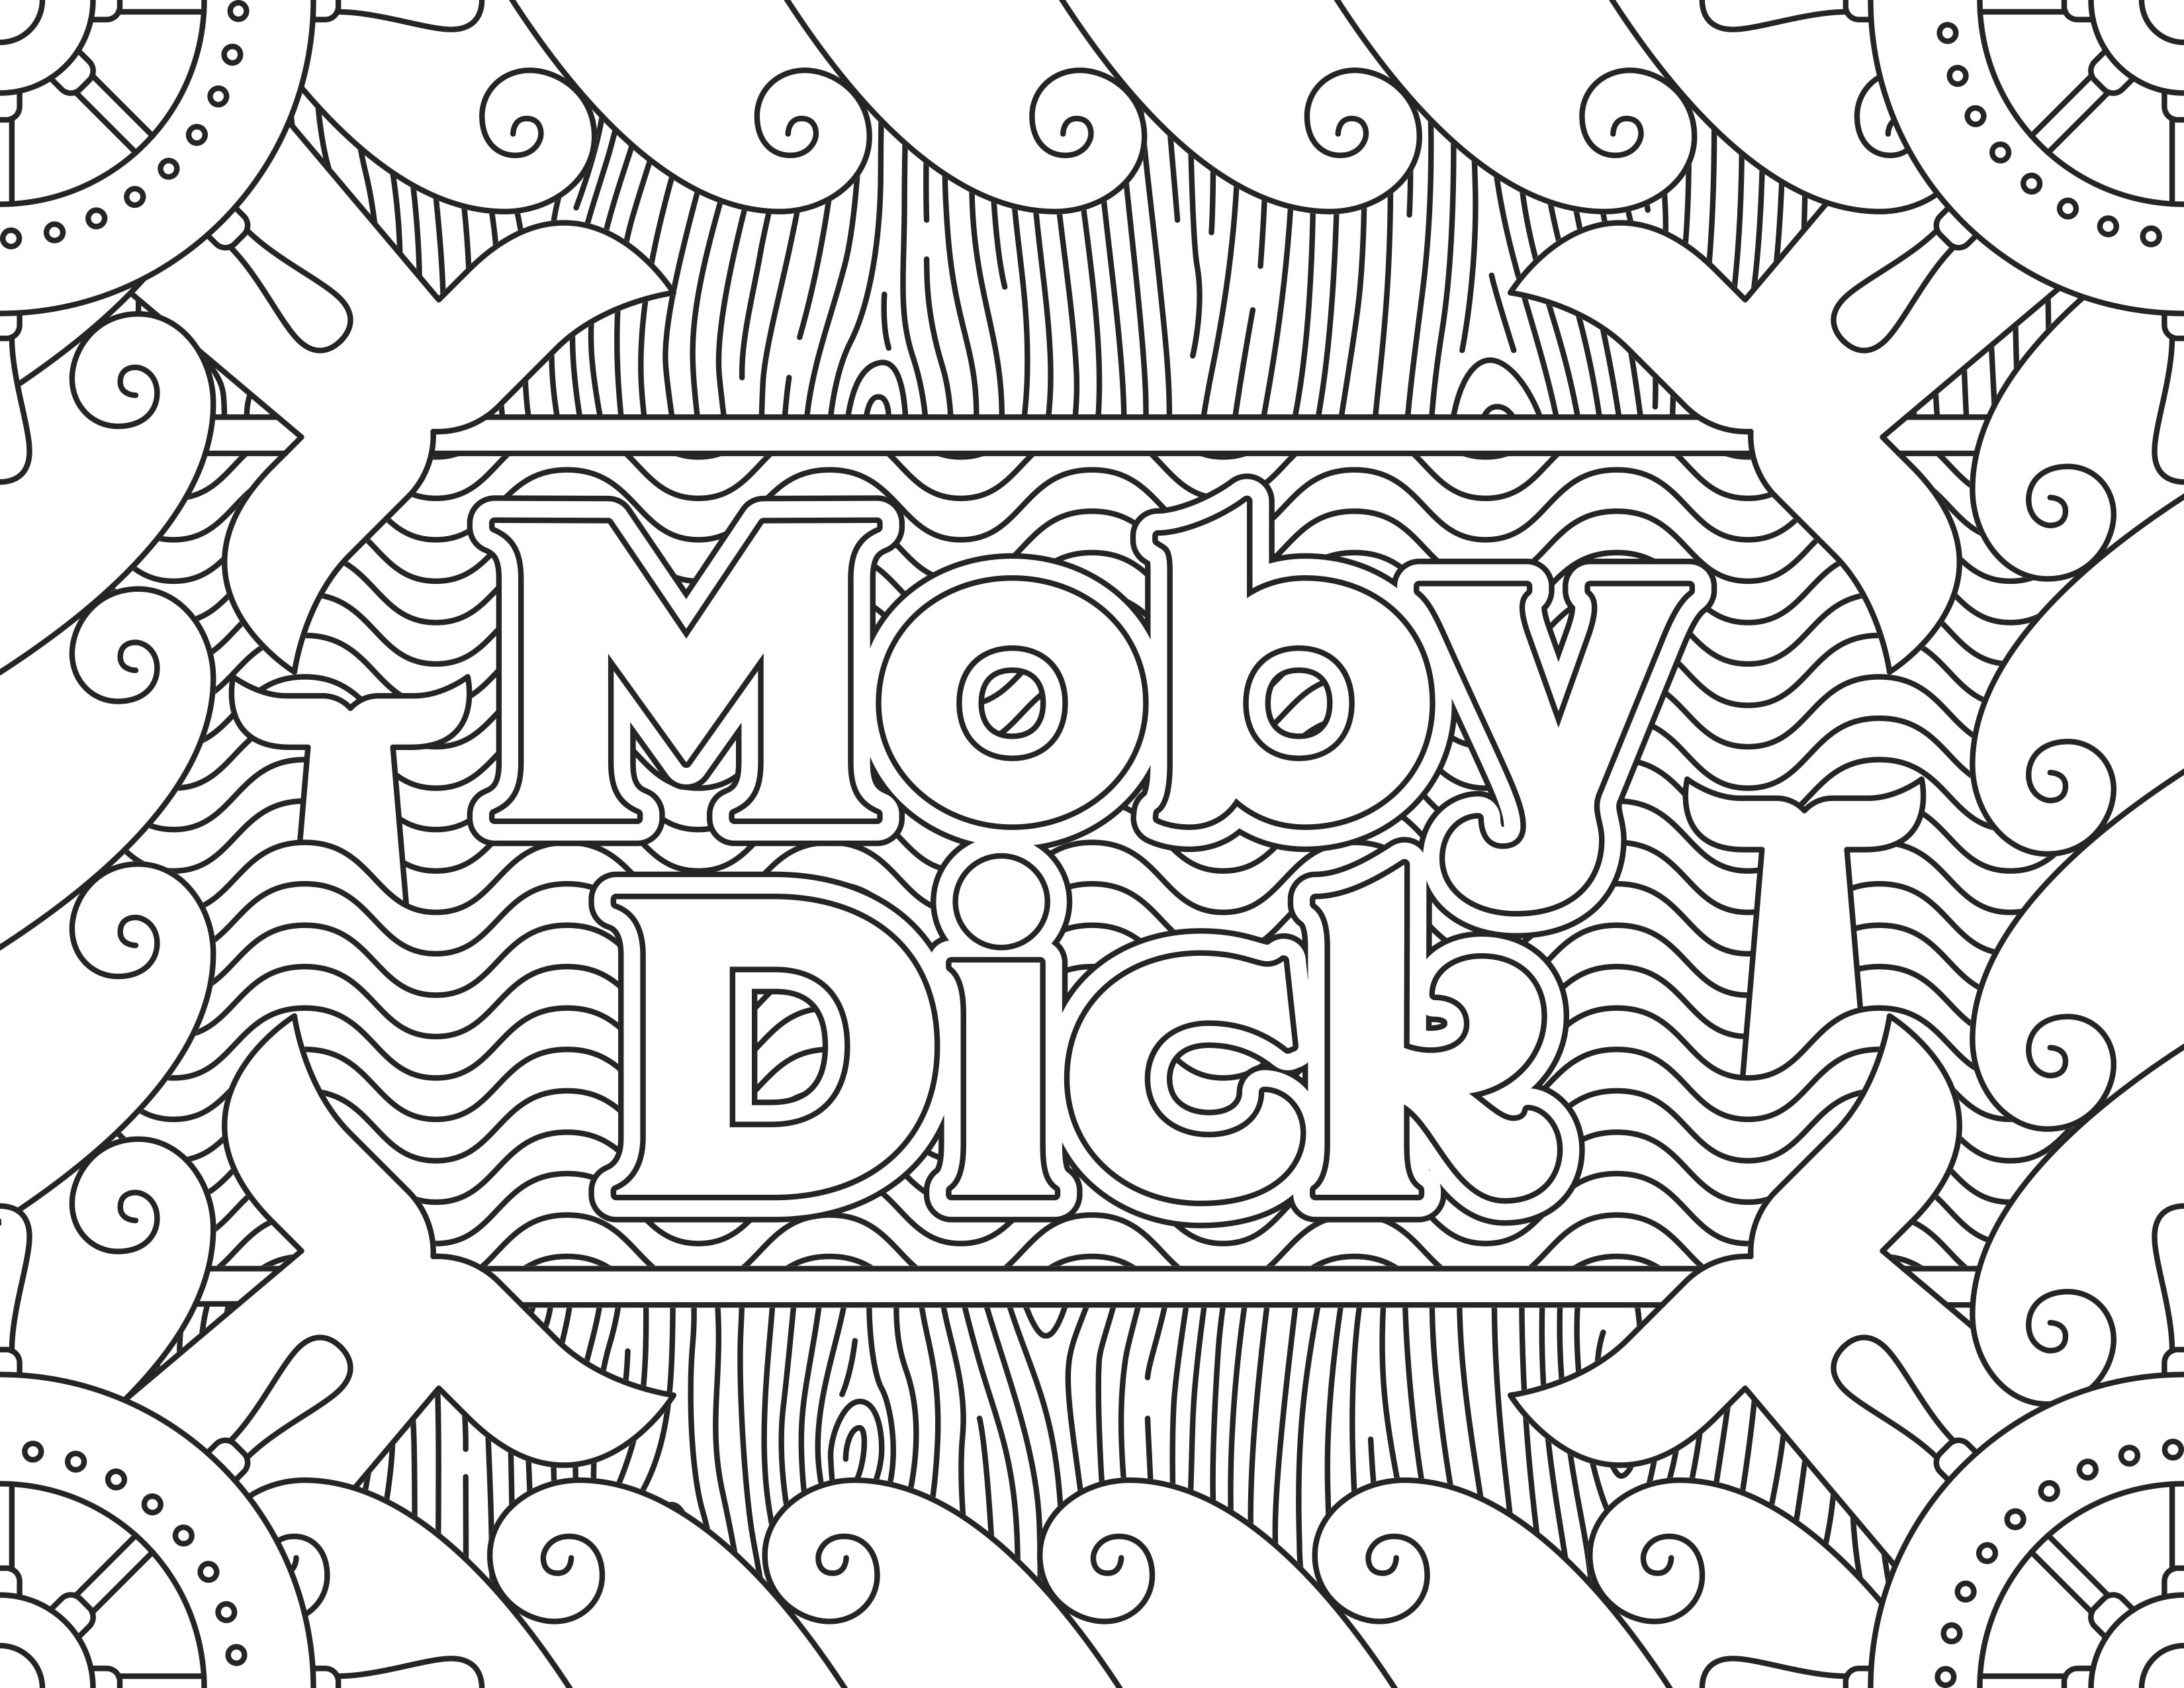 Penis Coloring Book
 6 FREE Printable Adult Coloring Pages Inspired by Literature